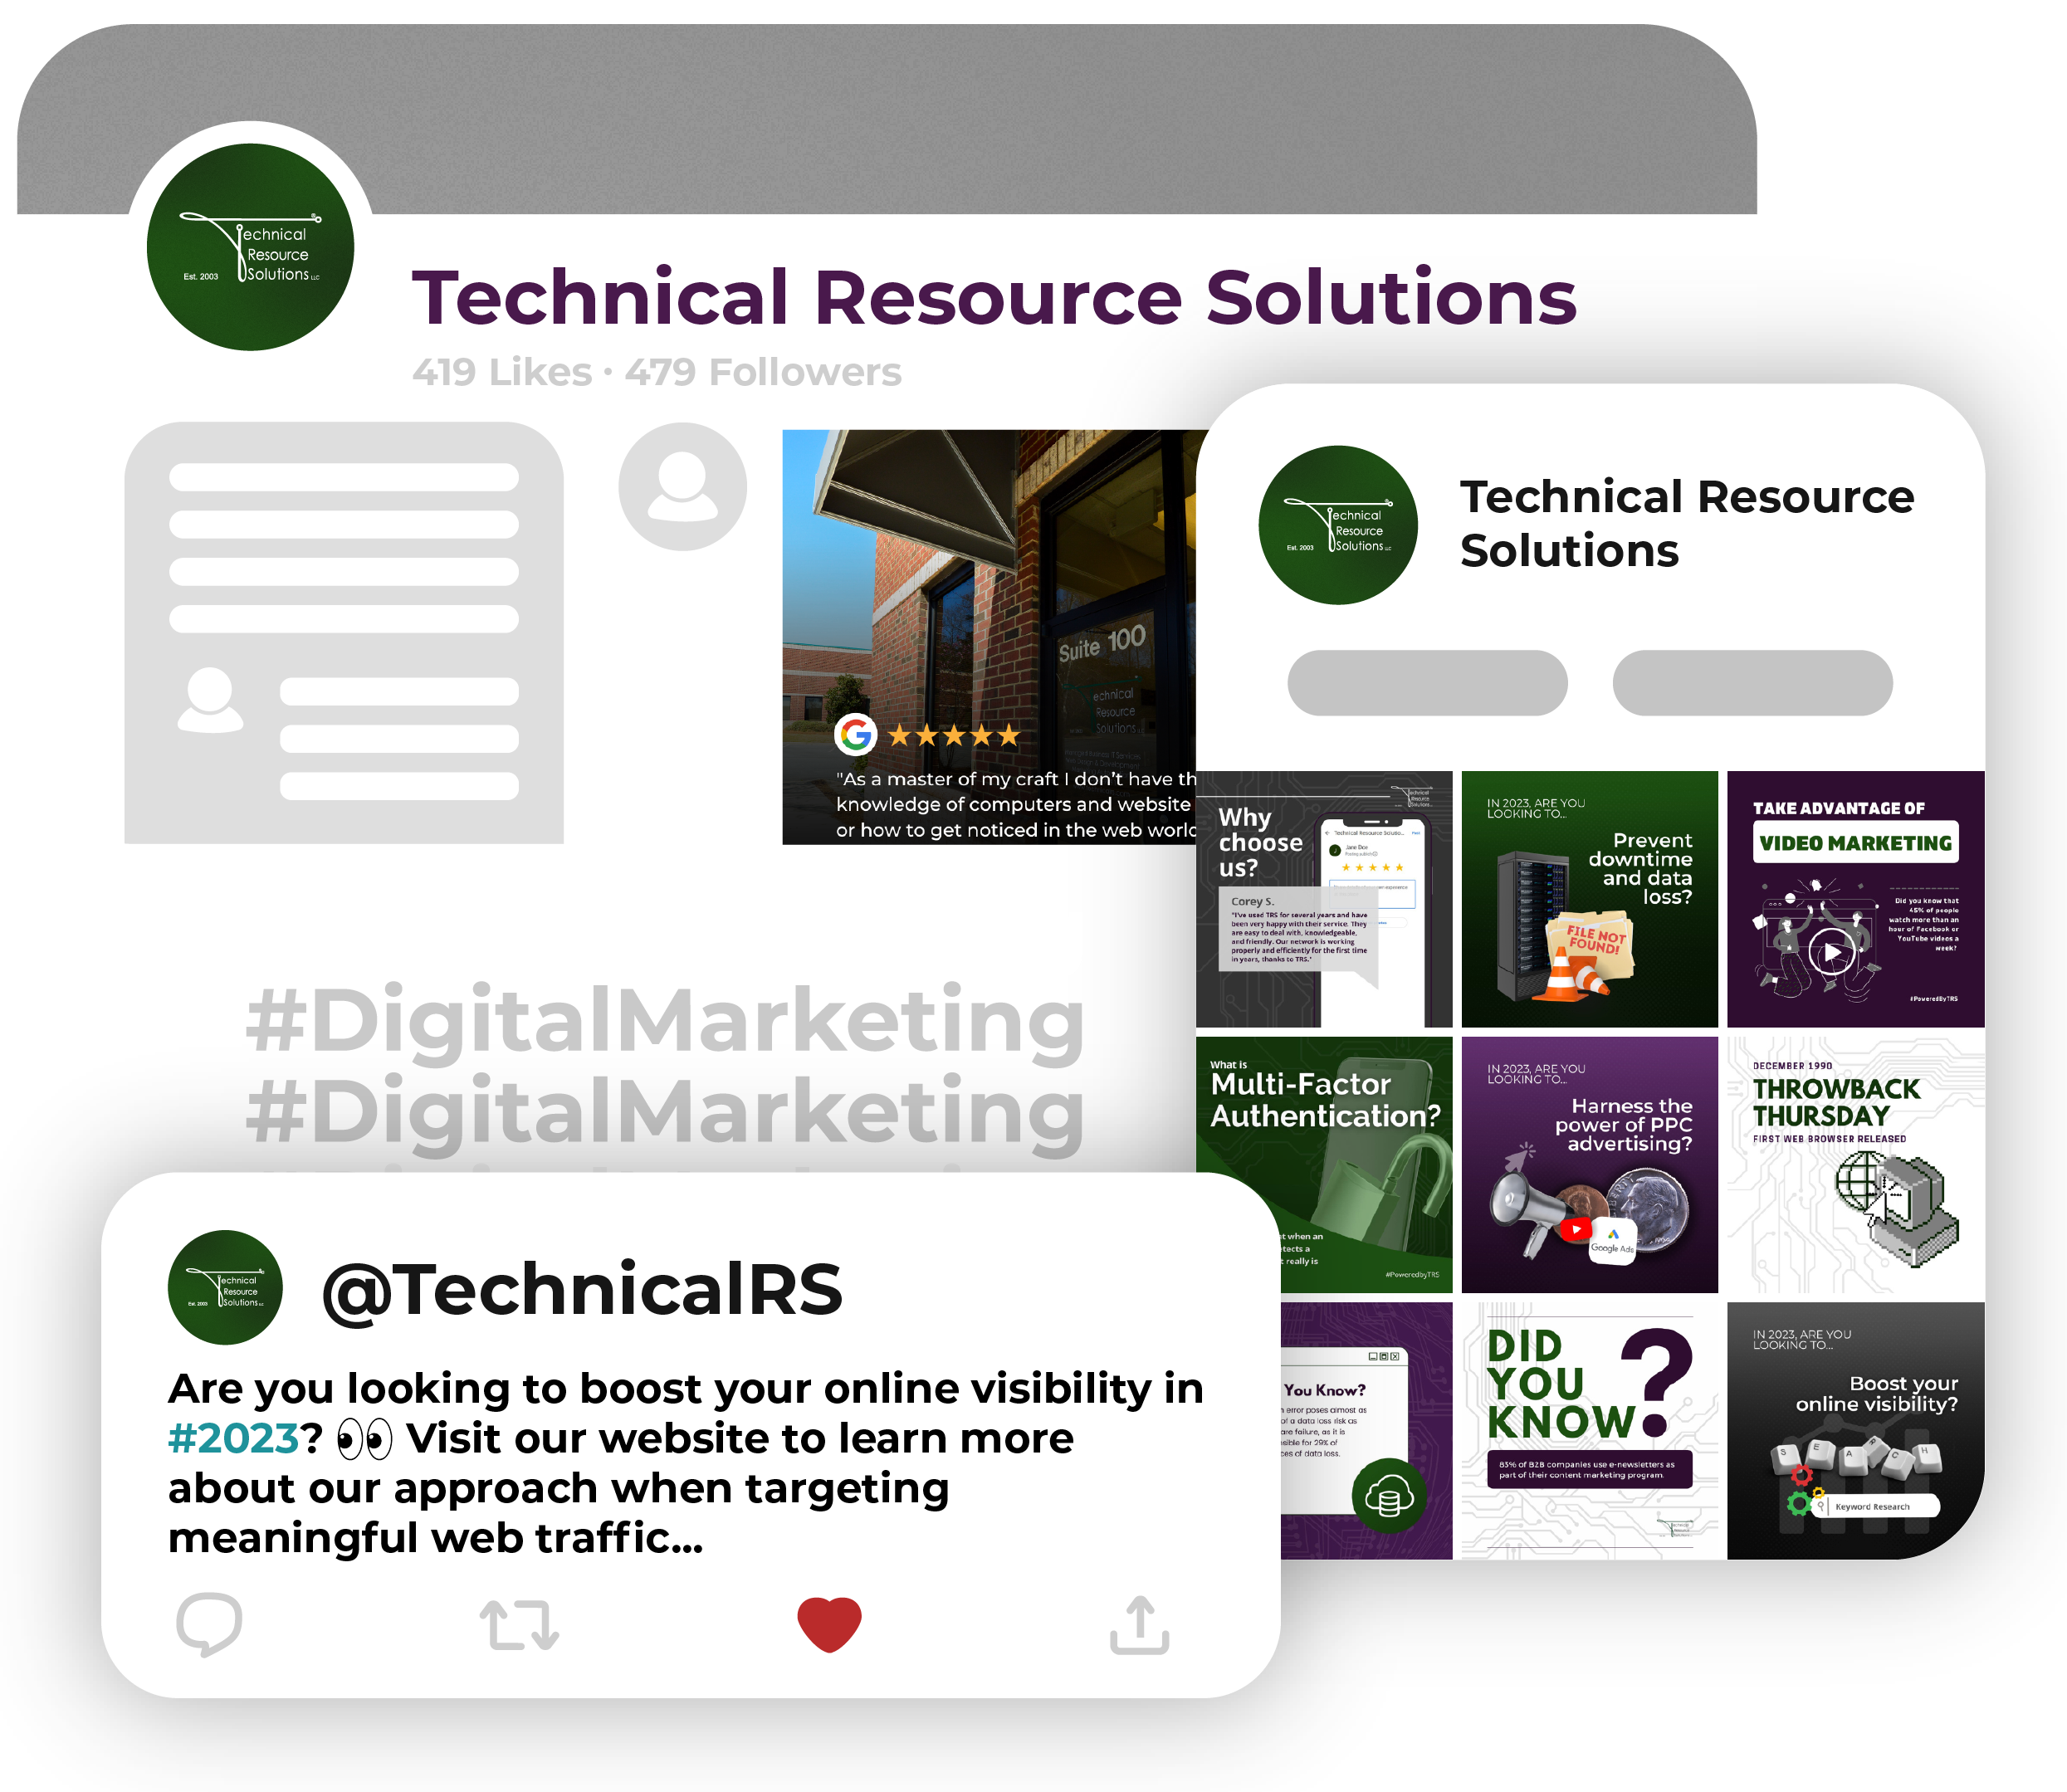 Digial marketing bubble design with the words &quot;Technical Resource Solutions and Digital Marketing&quot; on it with grey icons